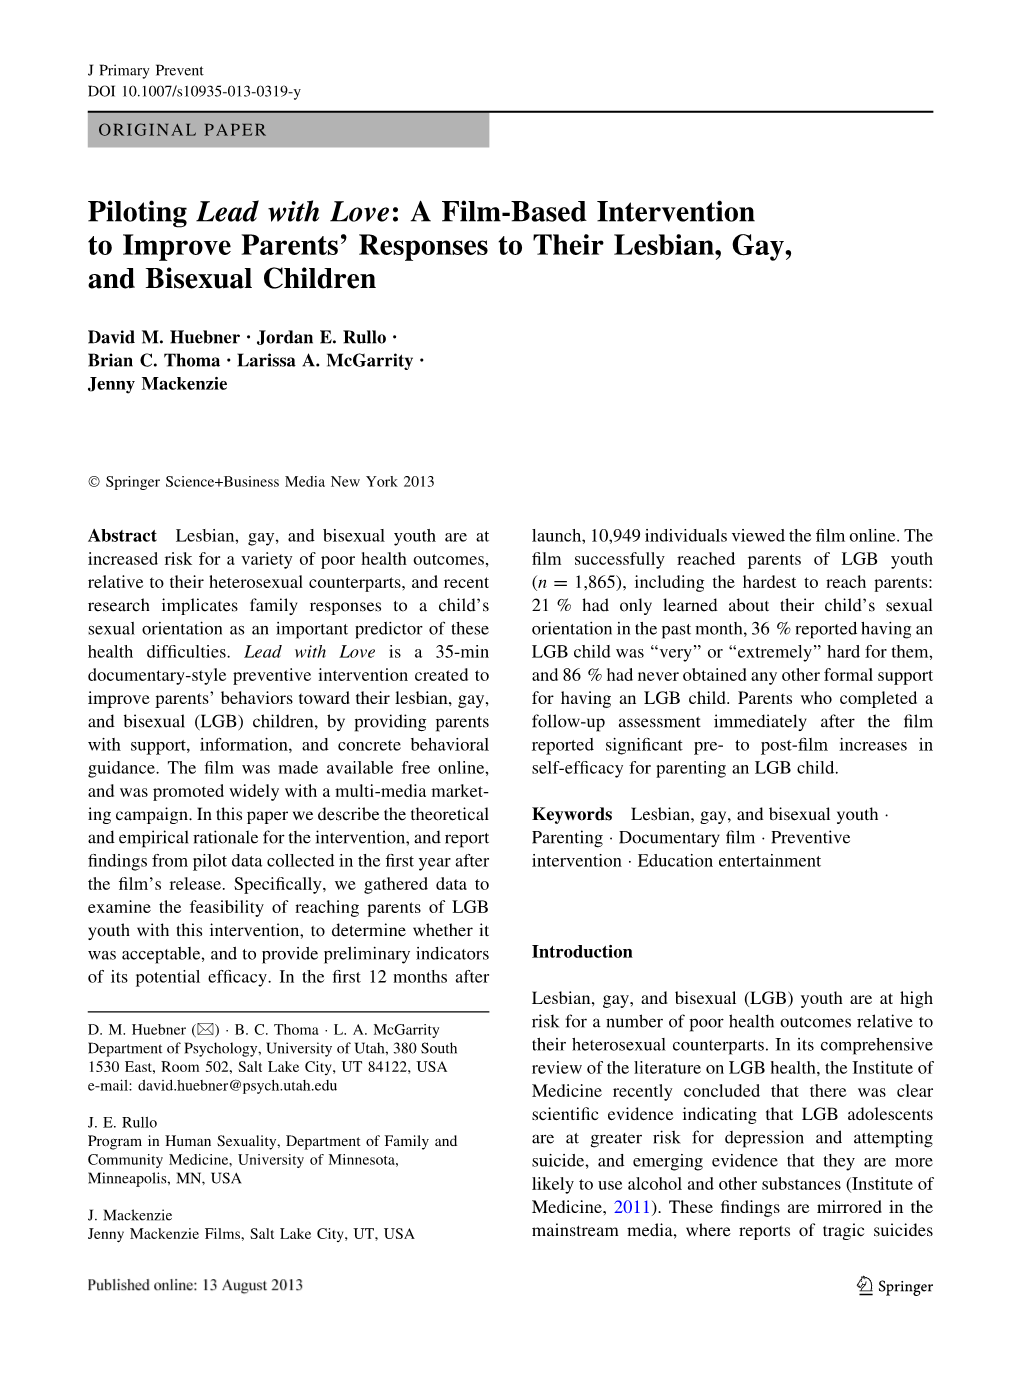 Piloting Lead with Love: a Film-Based Intervention to Improve Parents’ Responses to Their Lesbian, Gay, and Bisexual Children